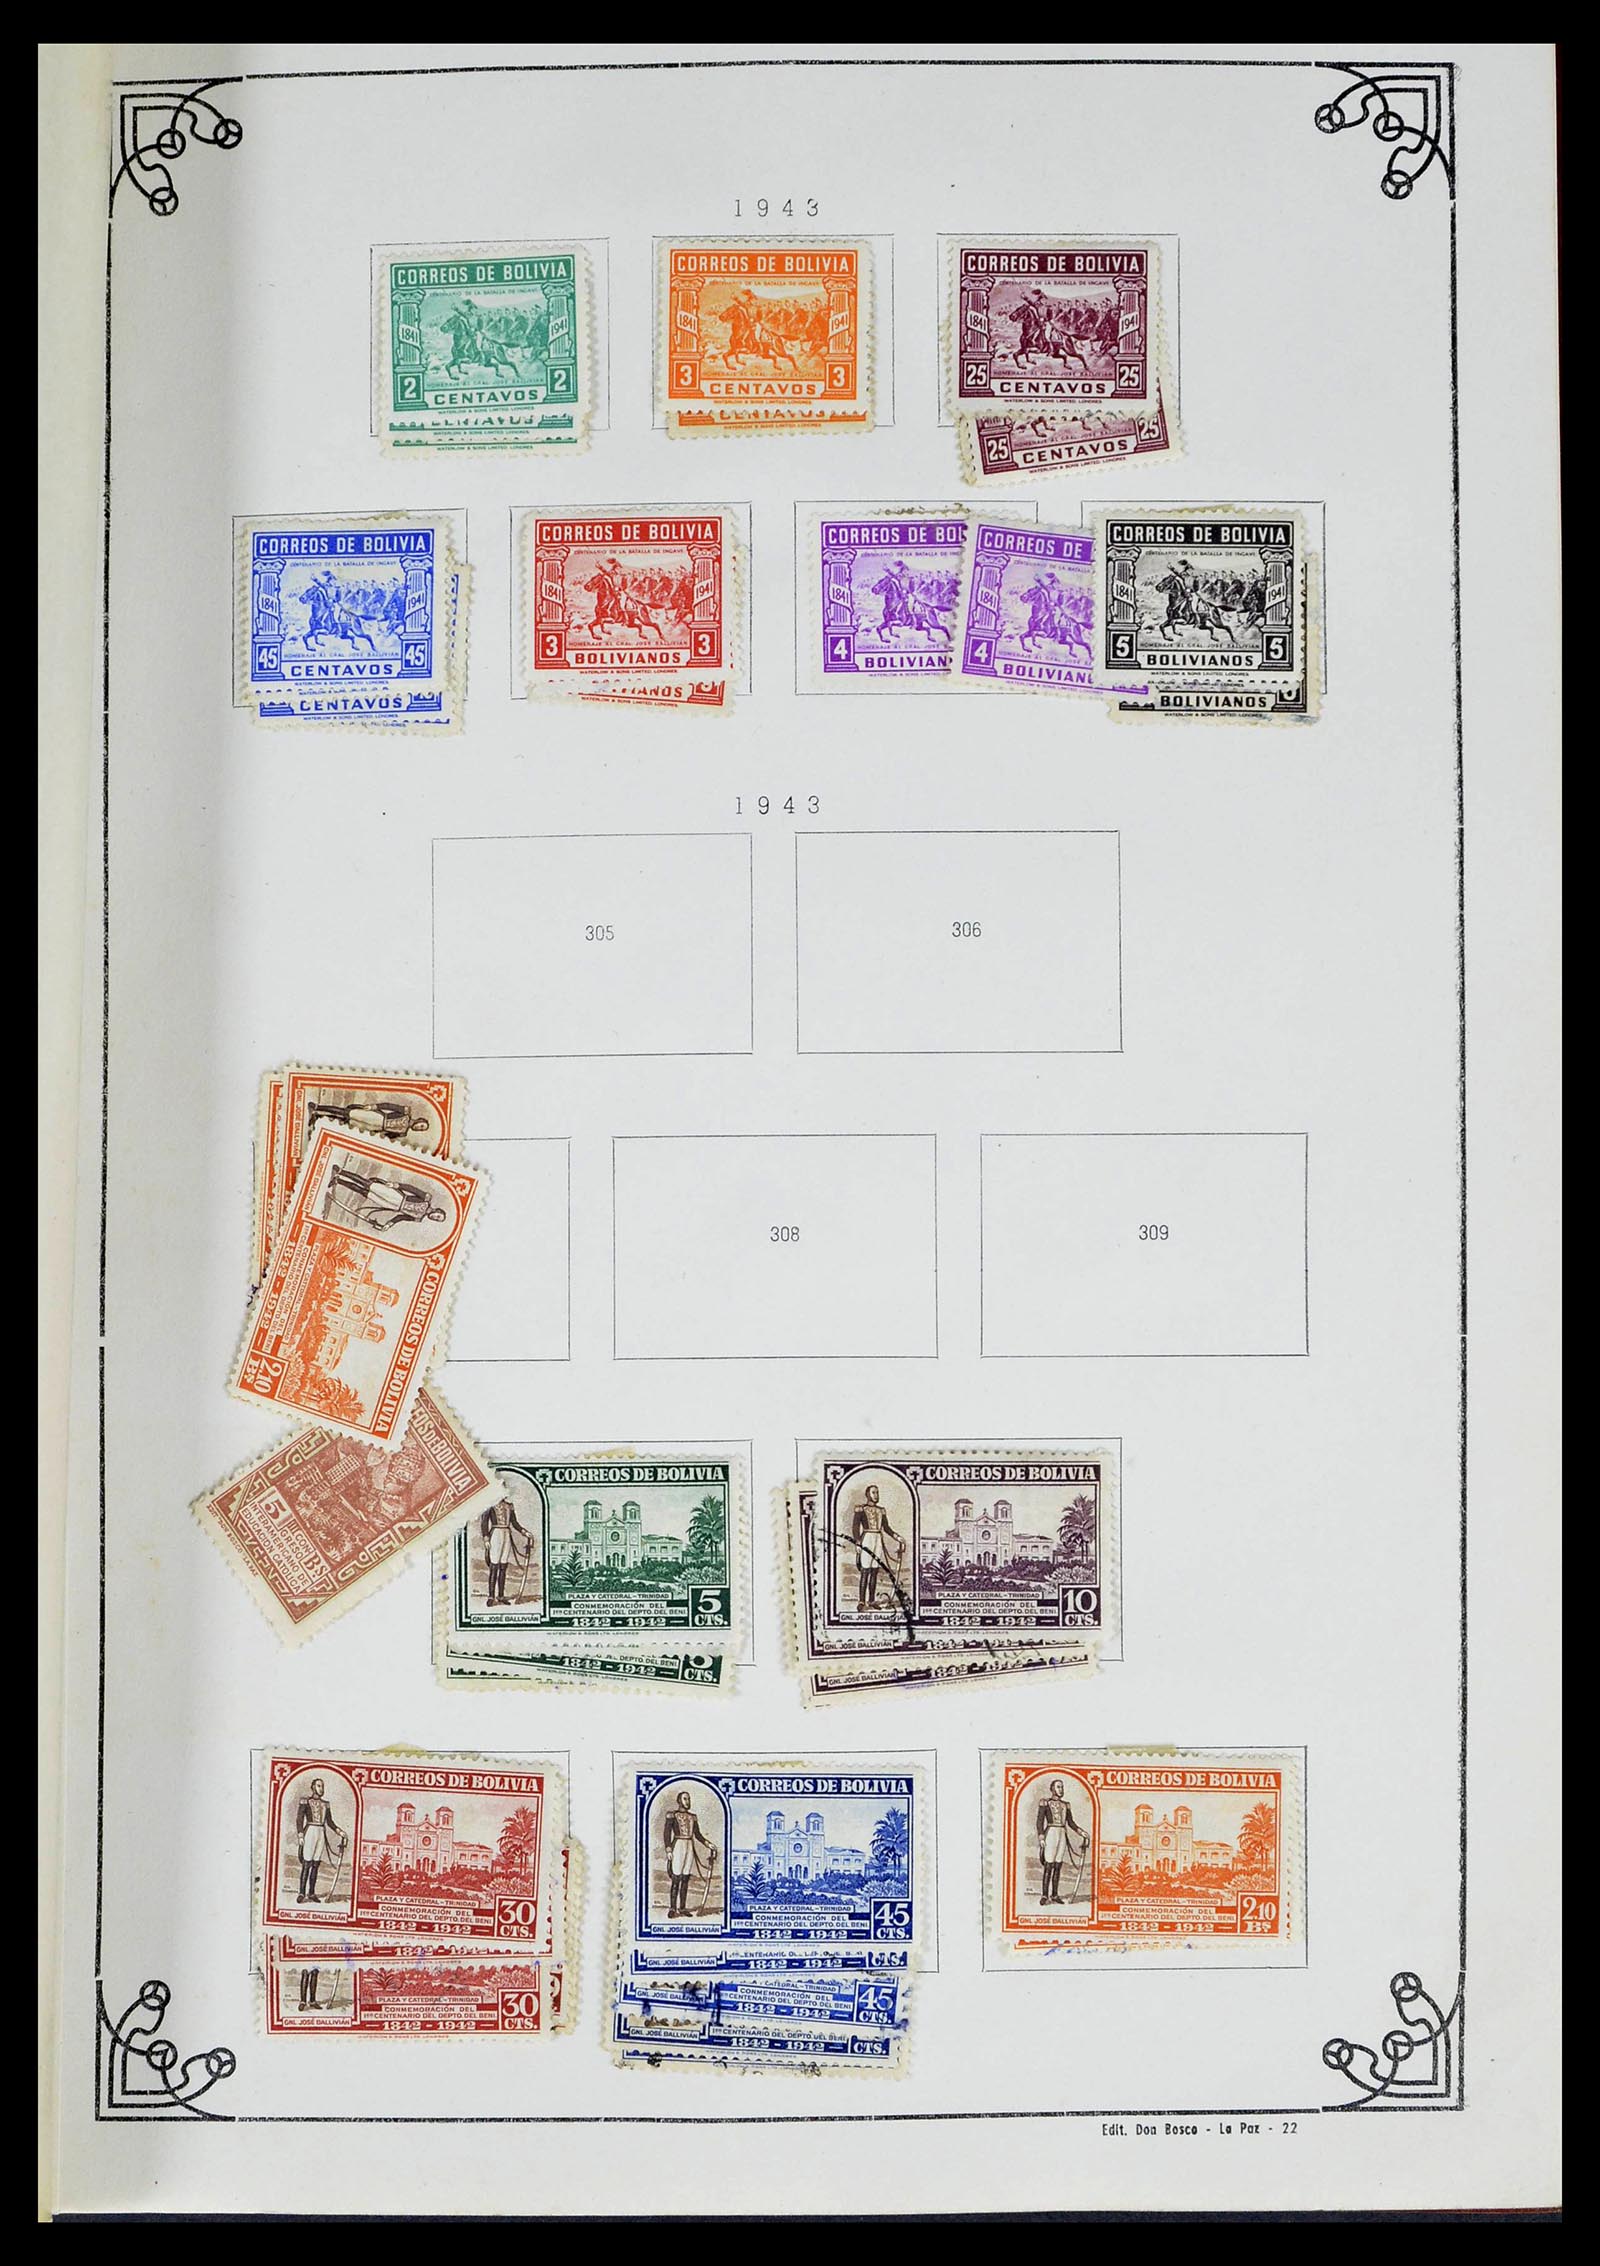 39224 0029 - Stamp collection 39224 Bolivia 1849-1955.